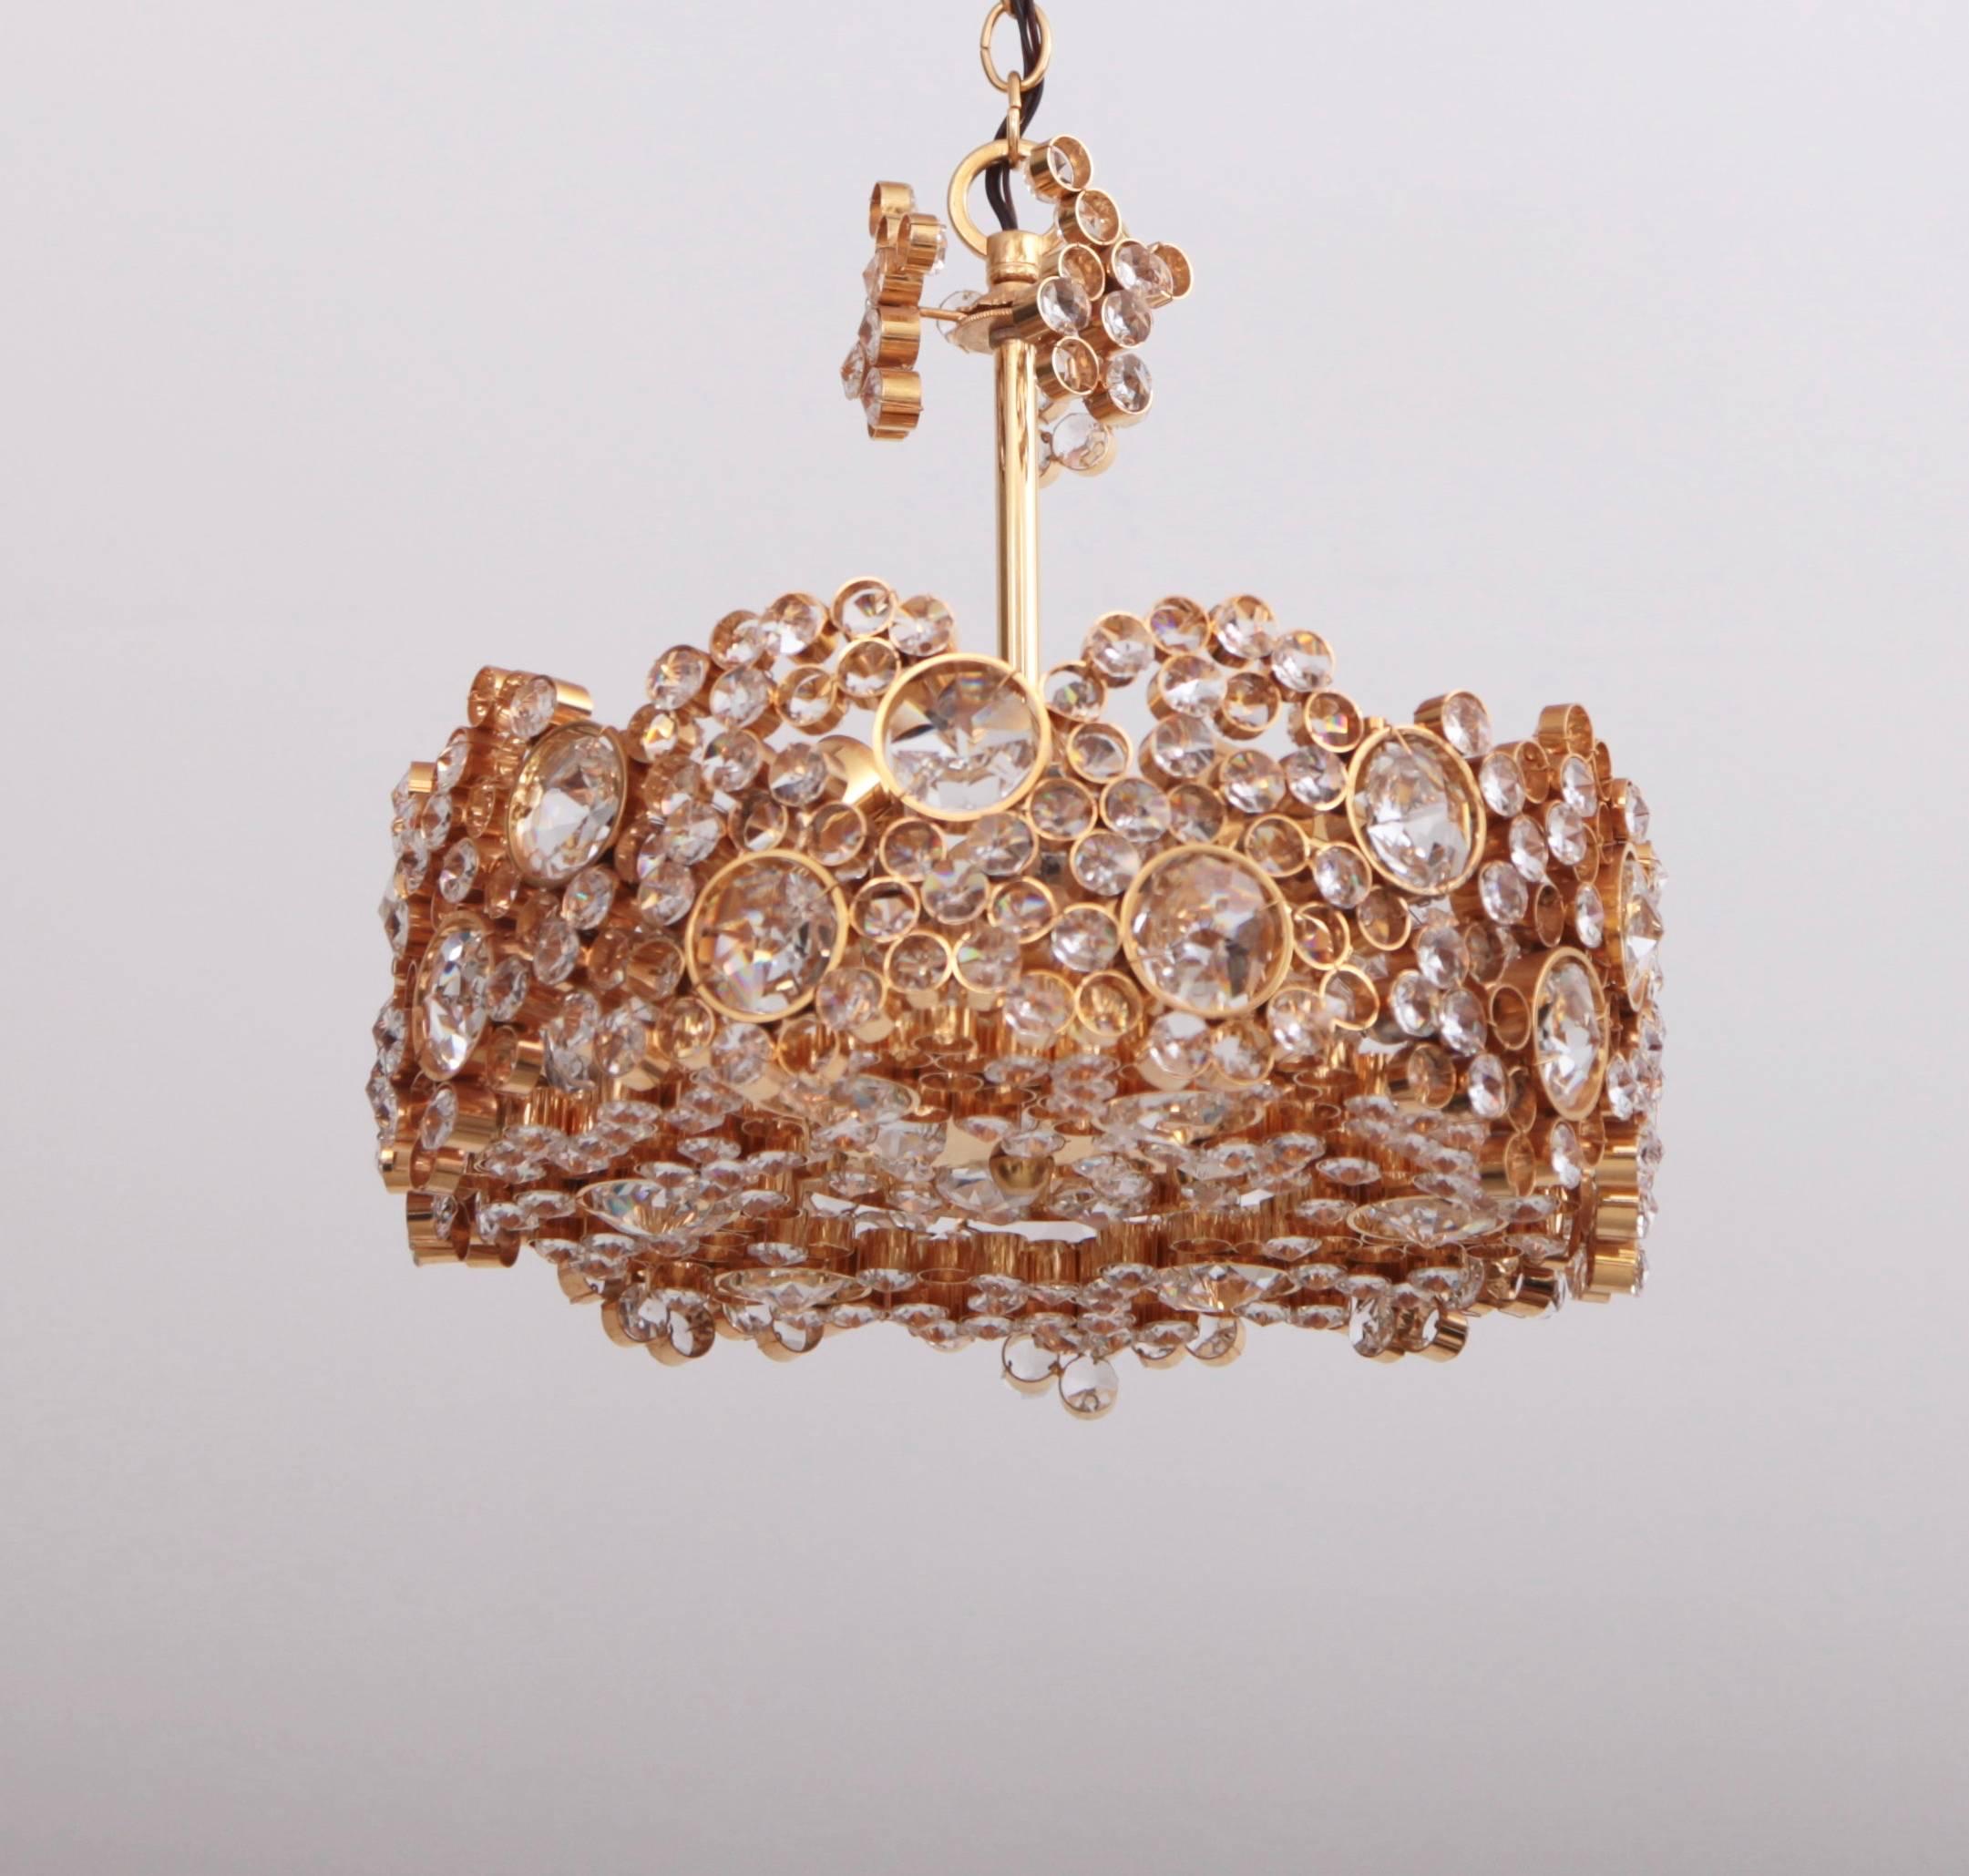 Outstanding chandelier from the 1960s by German high end crystal glass manufacturer Palwa. The 24-carat gold-plated brass frame is encrusted with hundreds of high quality diamond like crystals. The chandelier is handmade, in excellent condition and